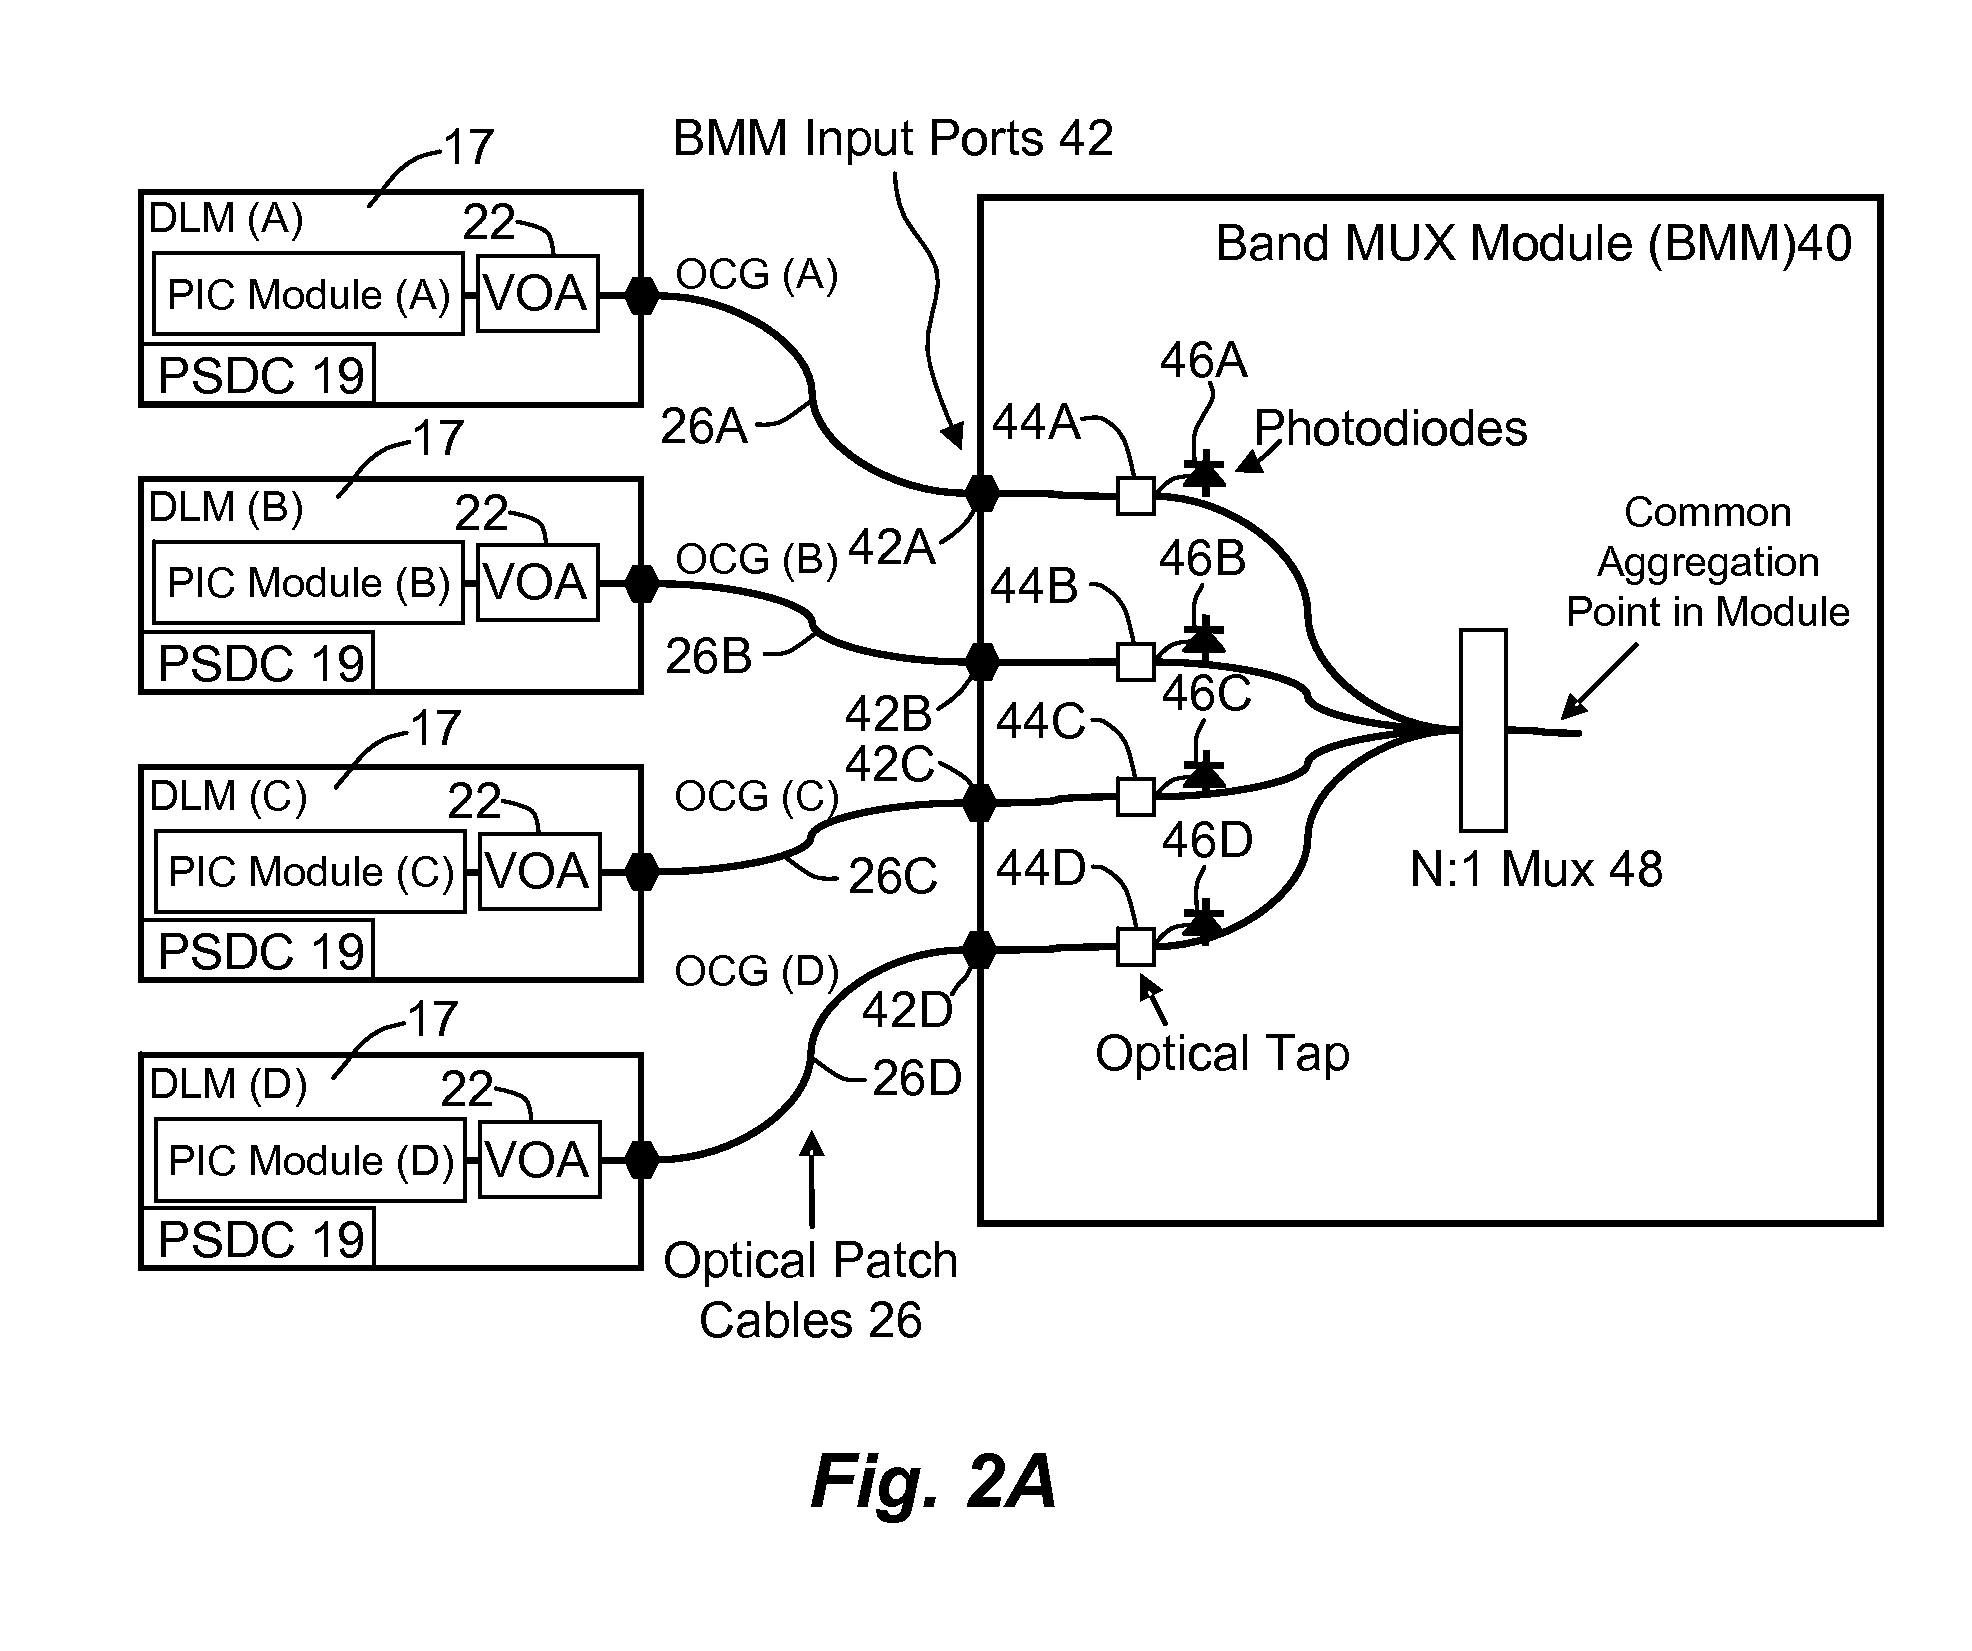 Optical autodiscovery for automated logical and physical connectivity check between optical modules